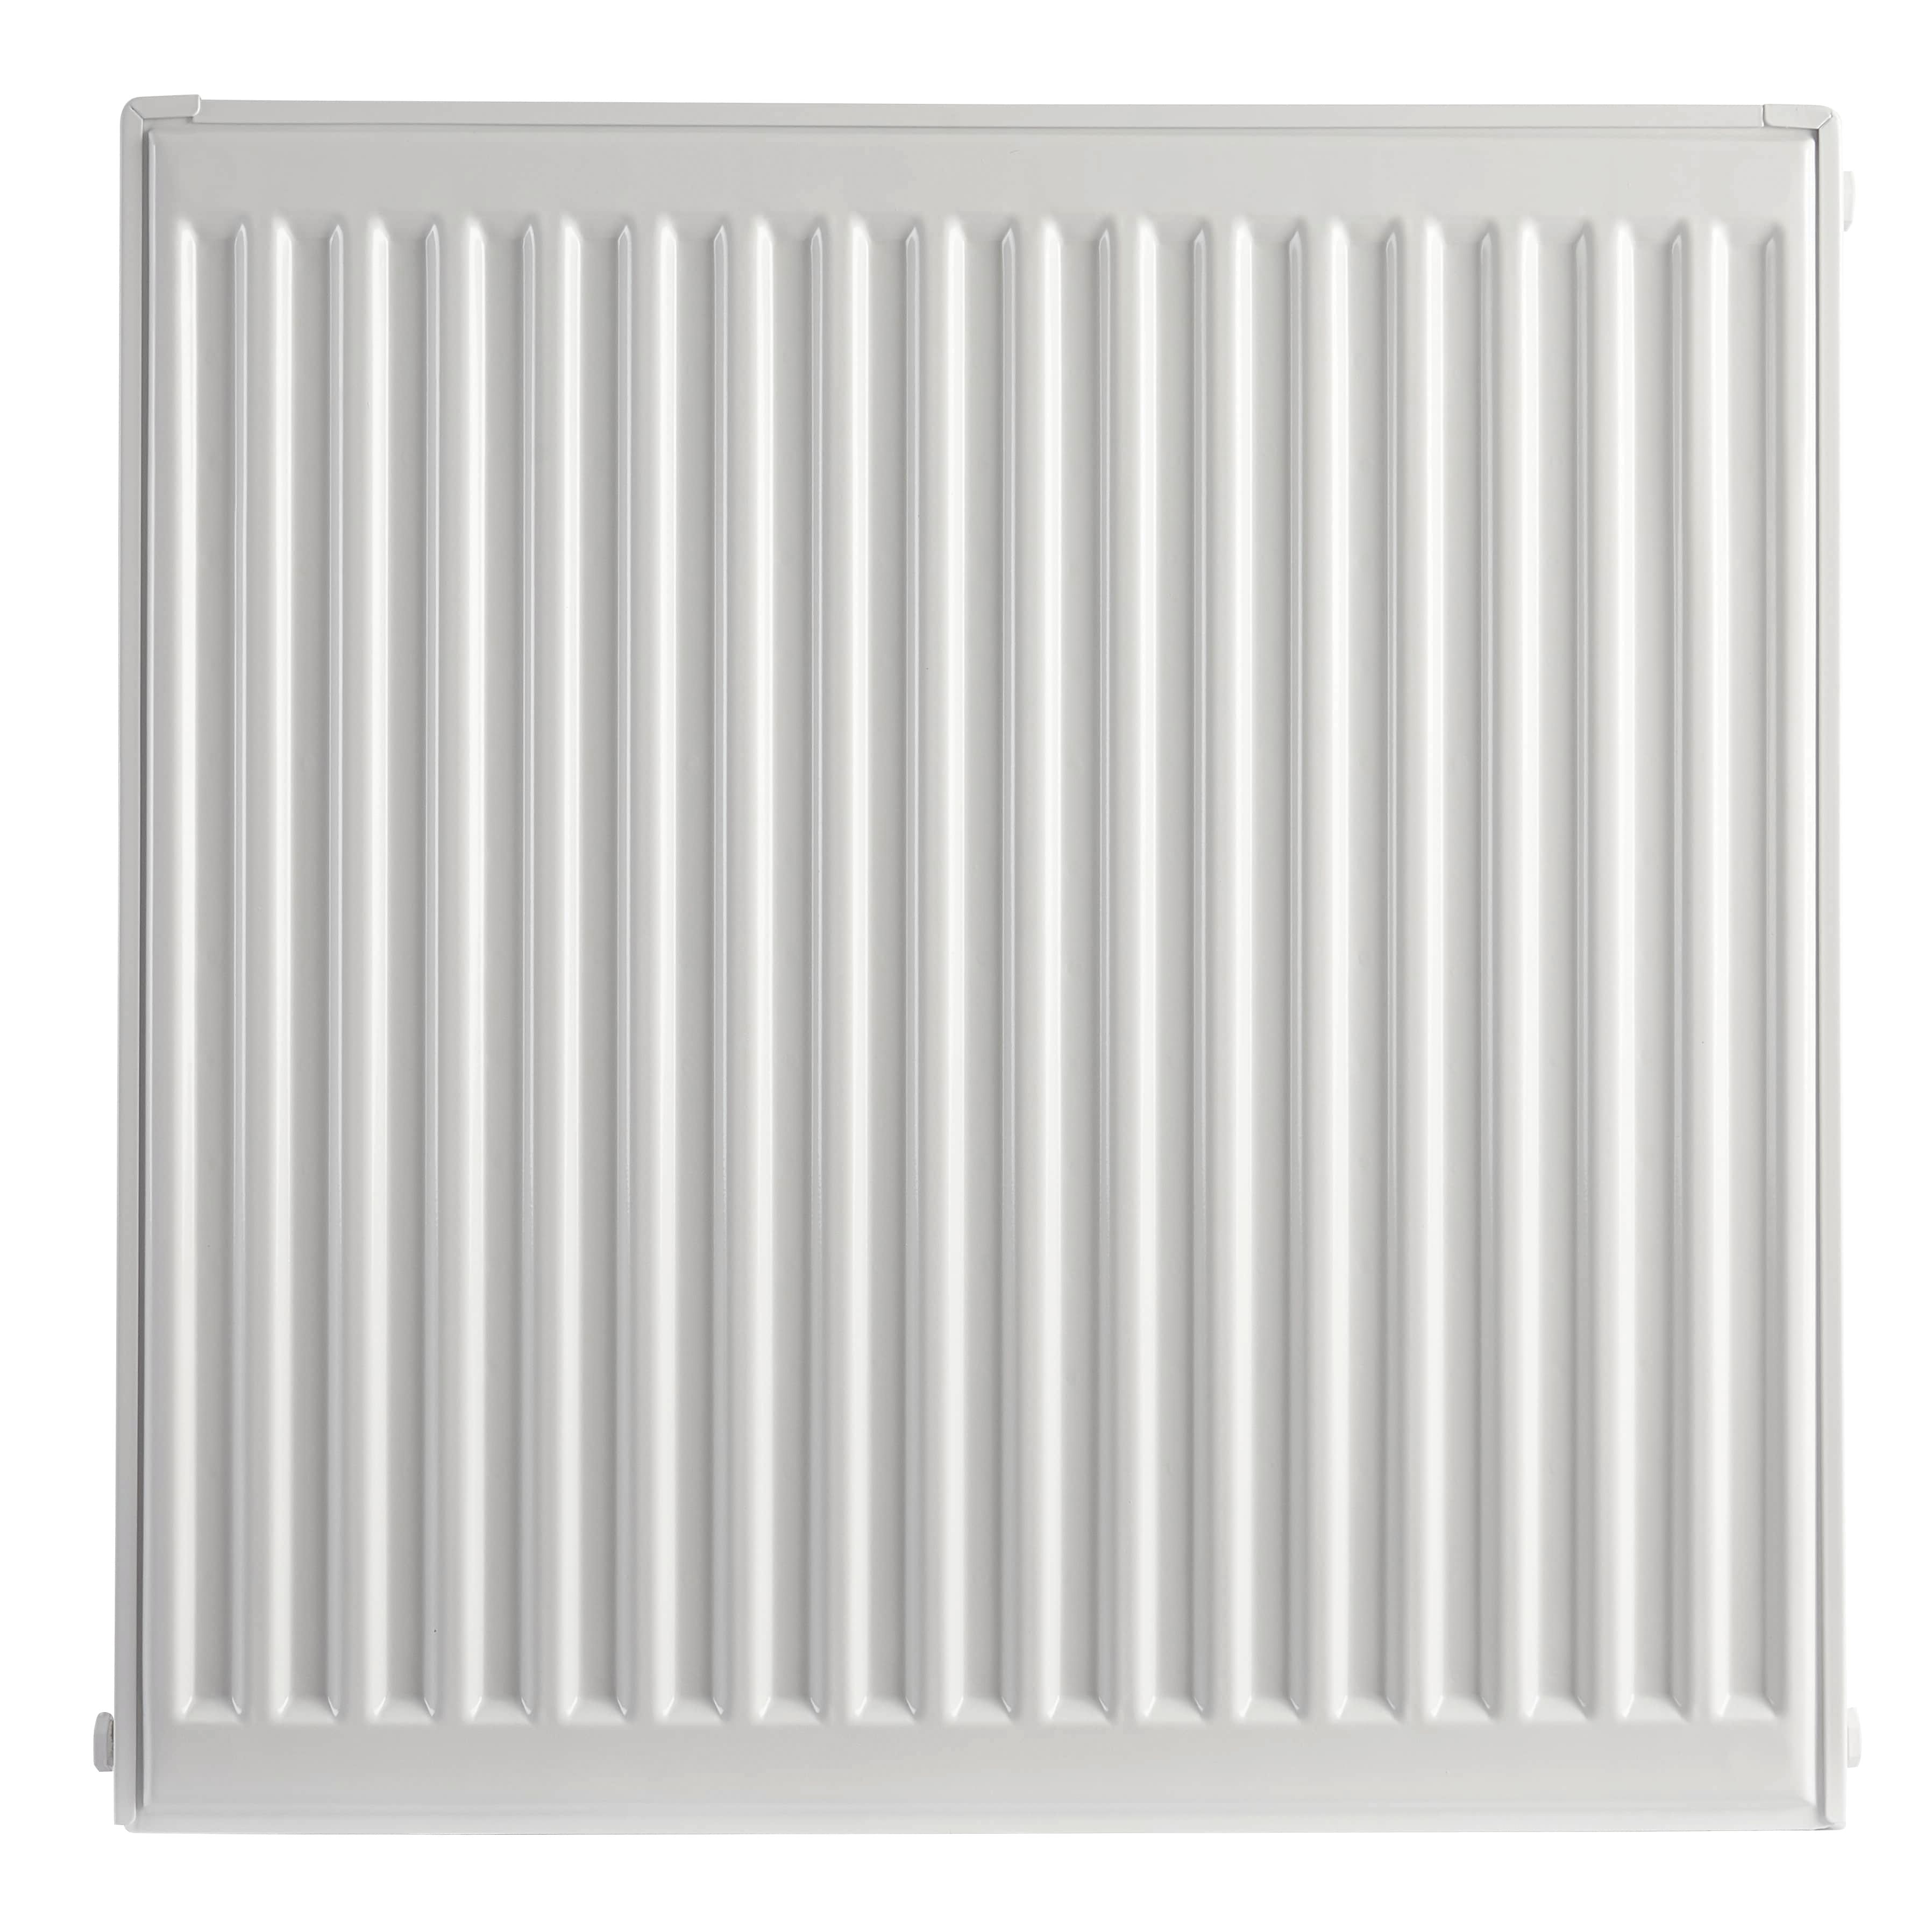 Homeline by Stelrad 700 x 700mm Type 21 Double Panel Plus Single Convector Radiator